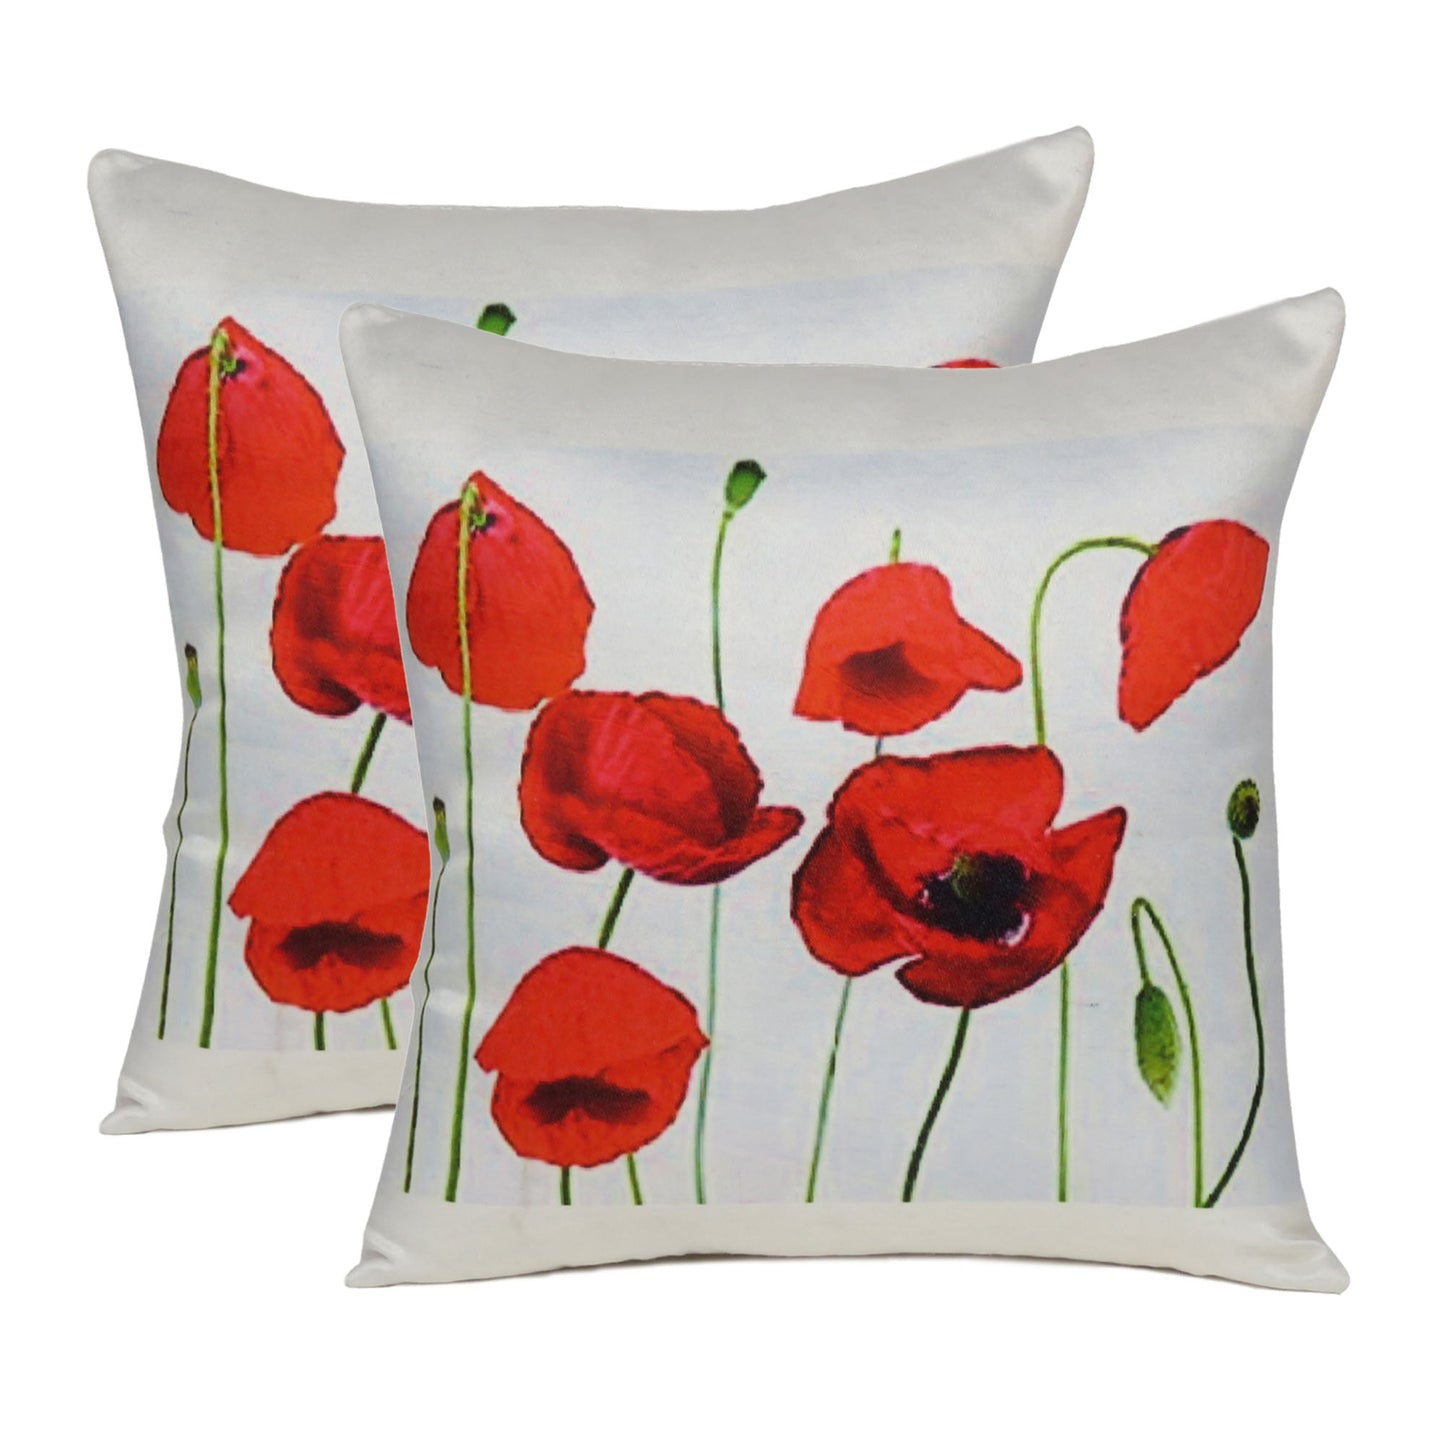 Red Floral Printed Cushion Cover in Set of 2